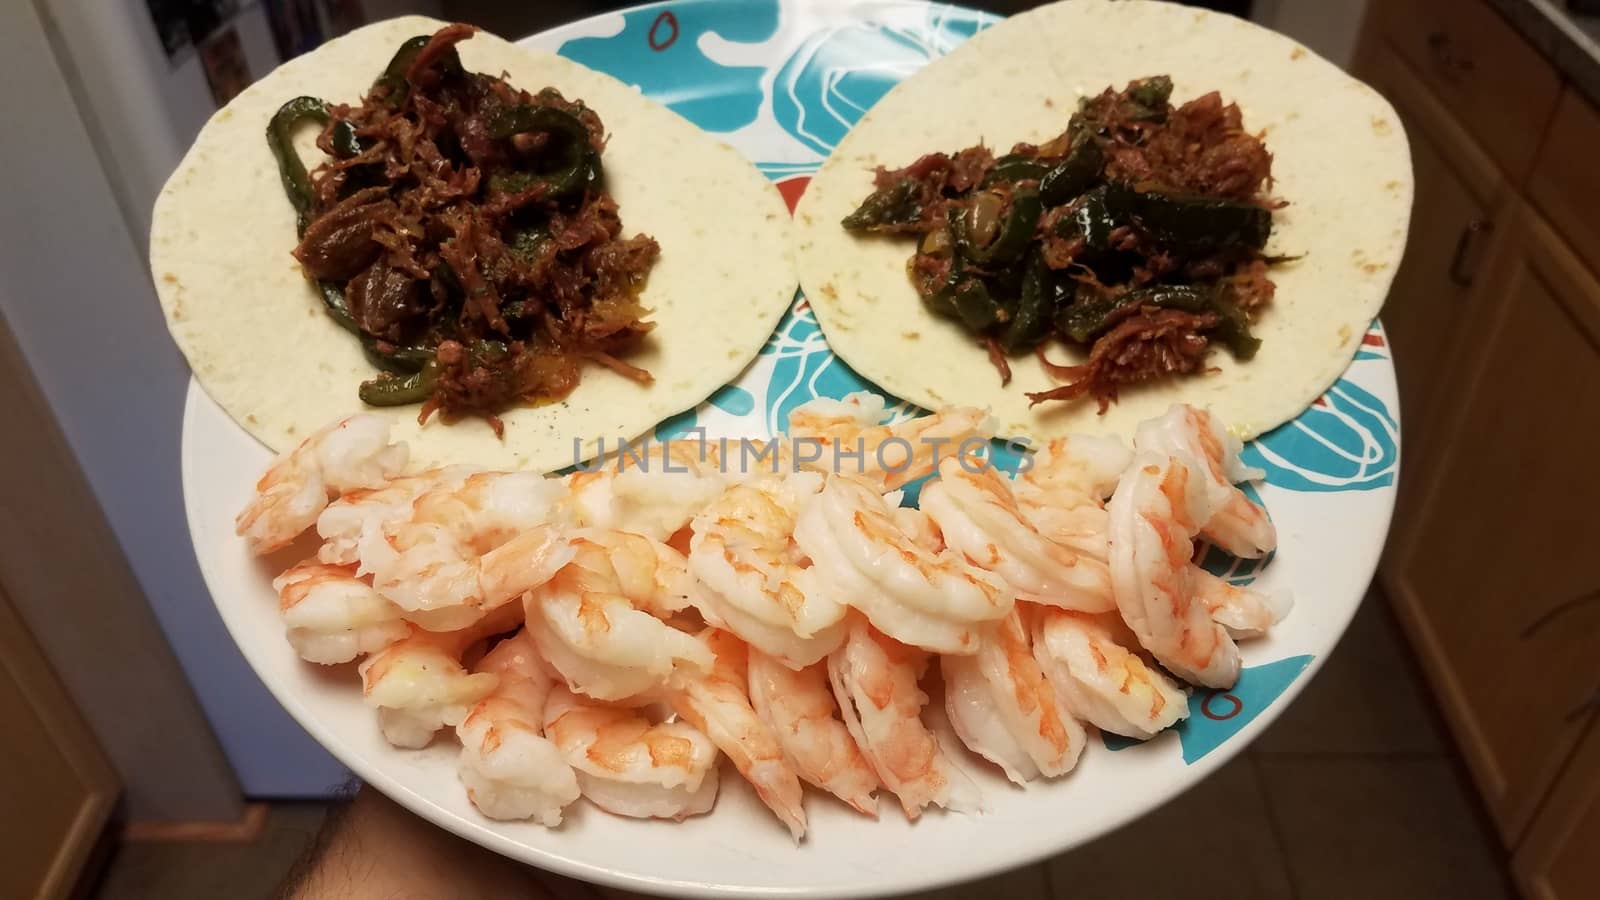 face with shrimp and pork tacos on plate by stockphotofan1